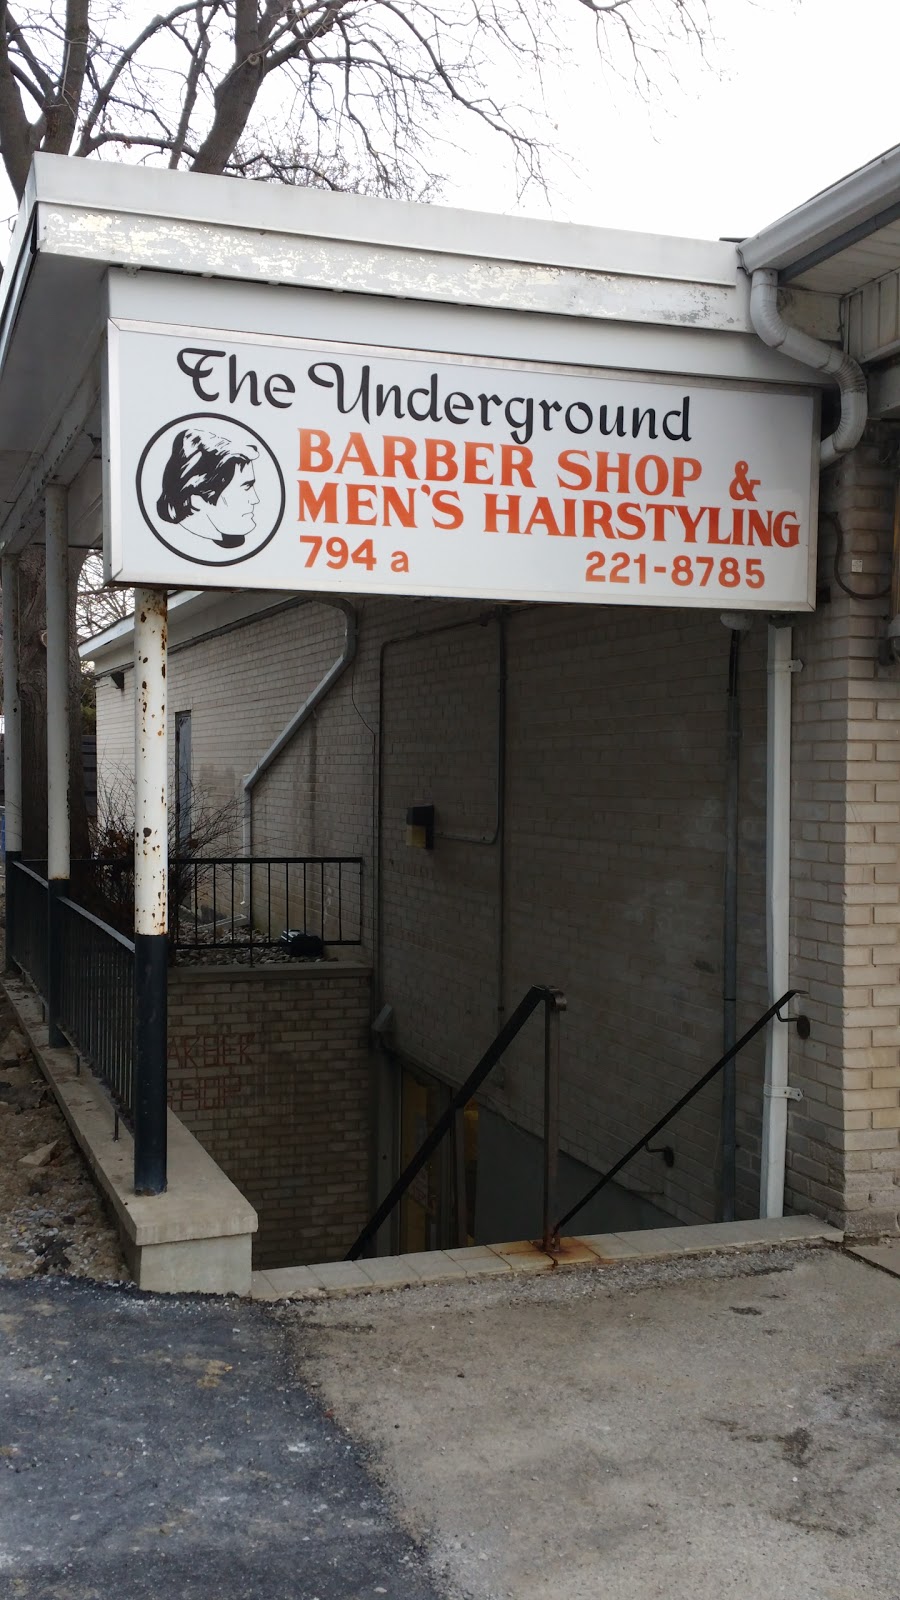 Underground Barber Shop | hair care | 794 Sheppard Ave E, North York, ON M2K 1C3, Canada | 4162218785 OR +1 416-221-8785